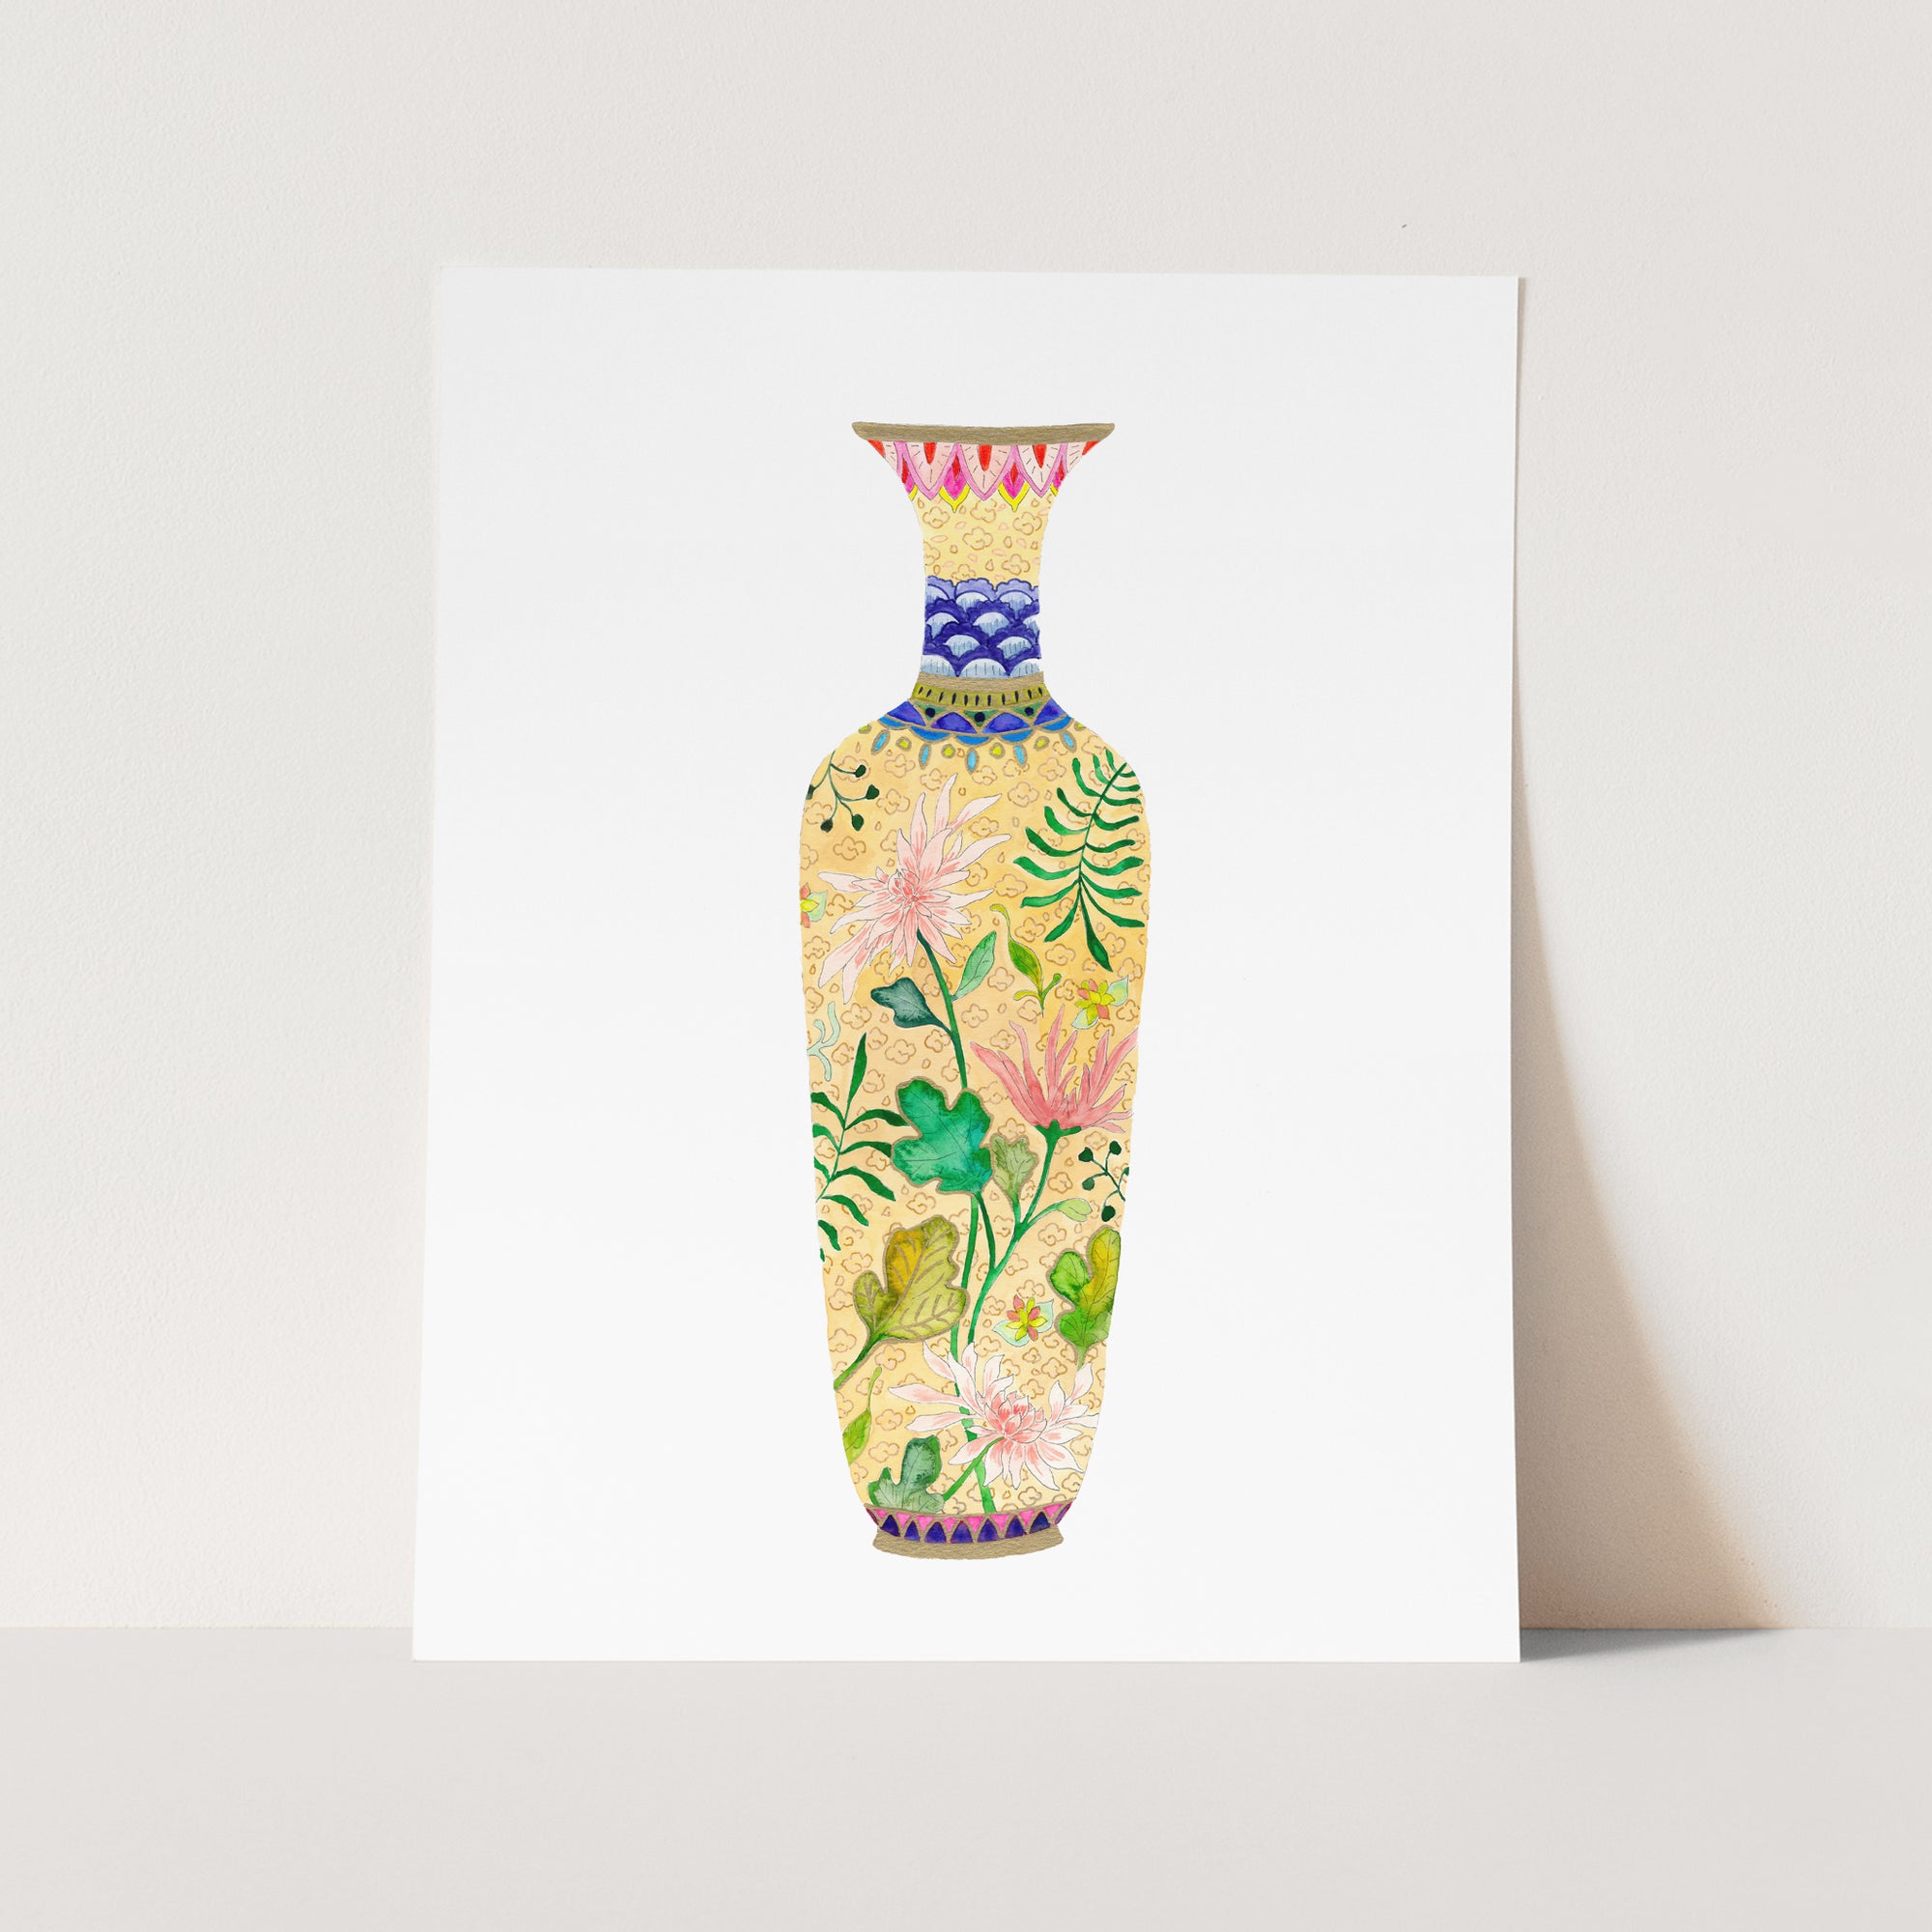 a painting of a vase on a white background